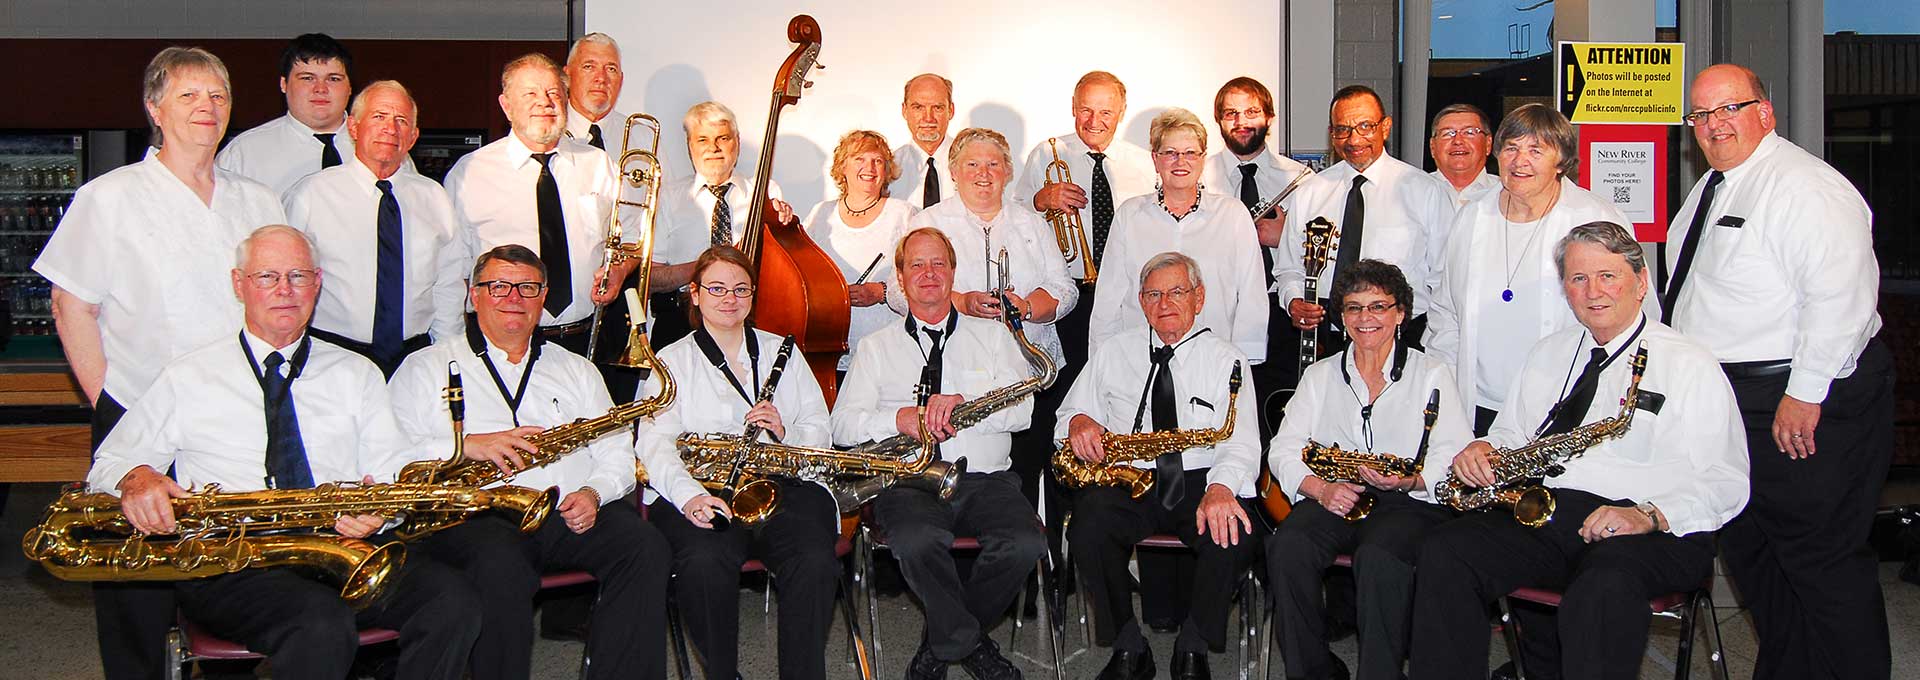 The Old Pros Big Band photo